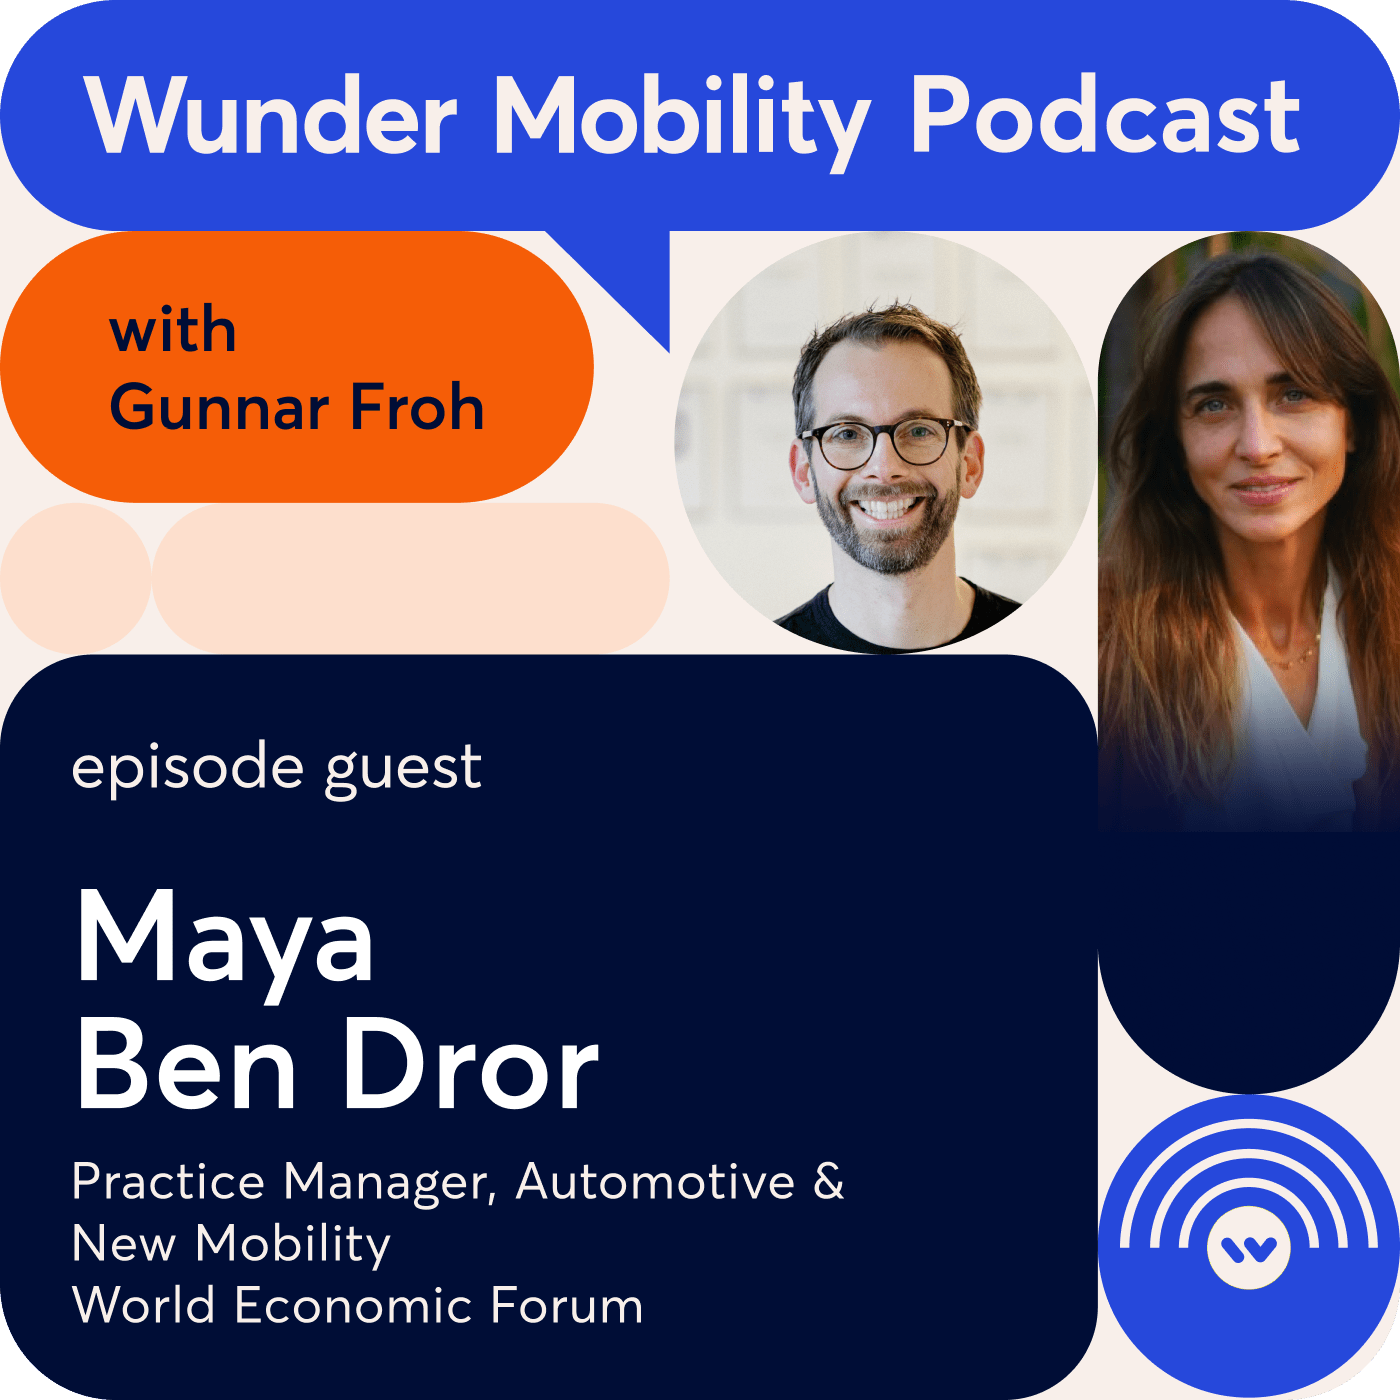 Wunder Mobility Podcast template featuring Maya Ben Dror and Gunnar Froh bubble shaped images.